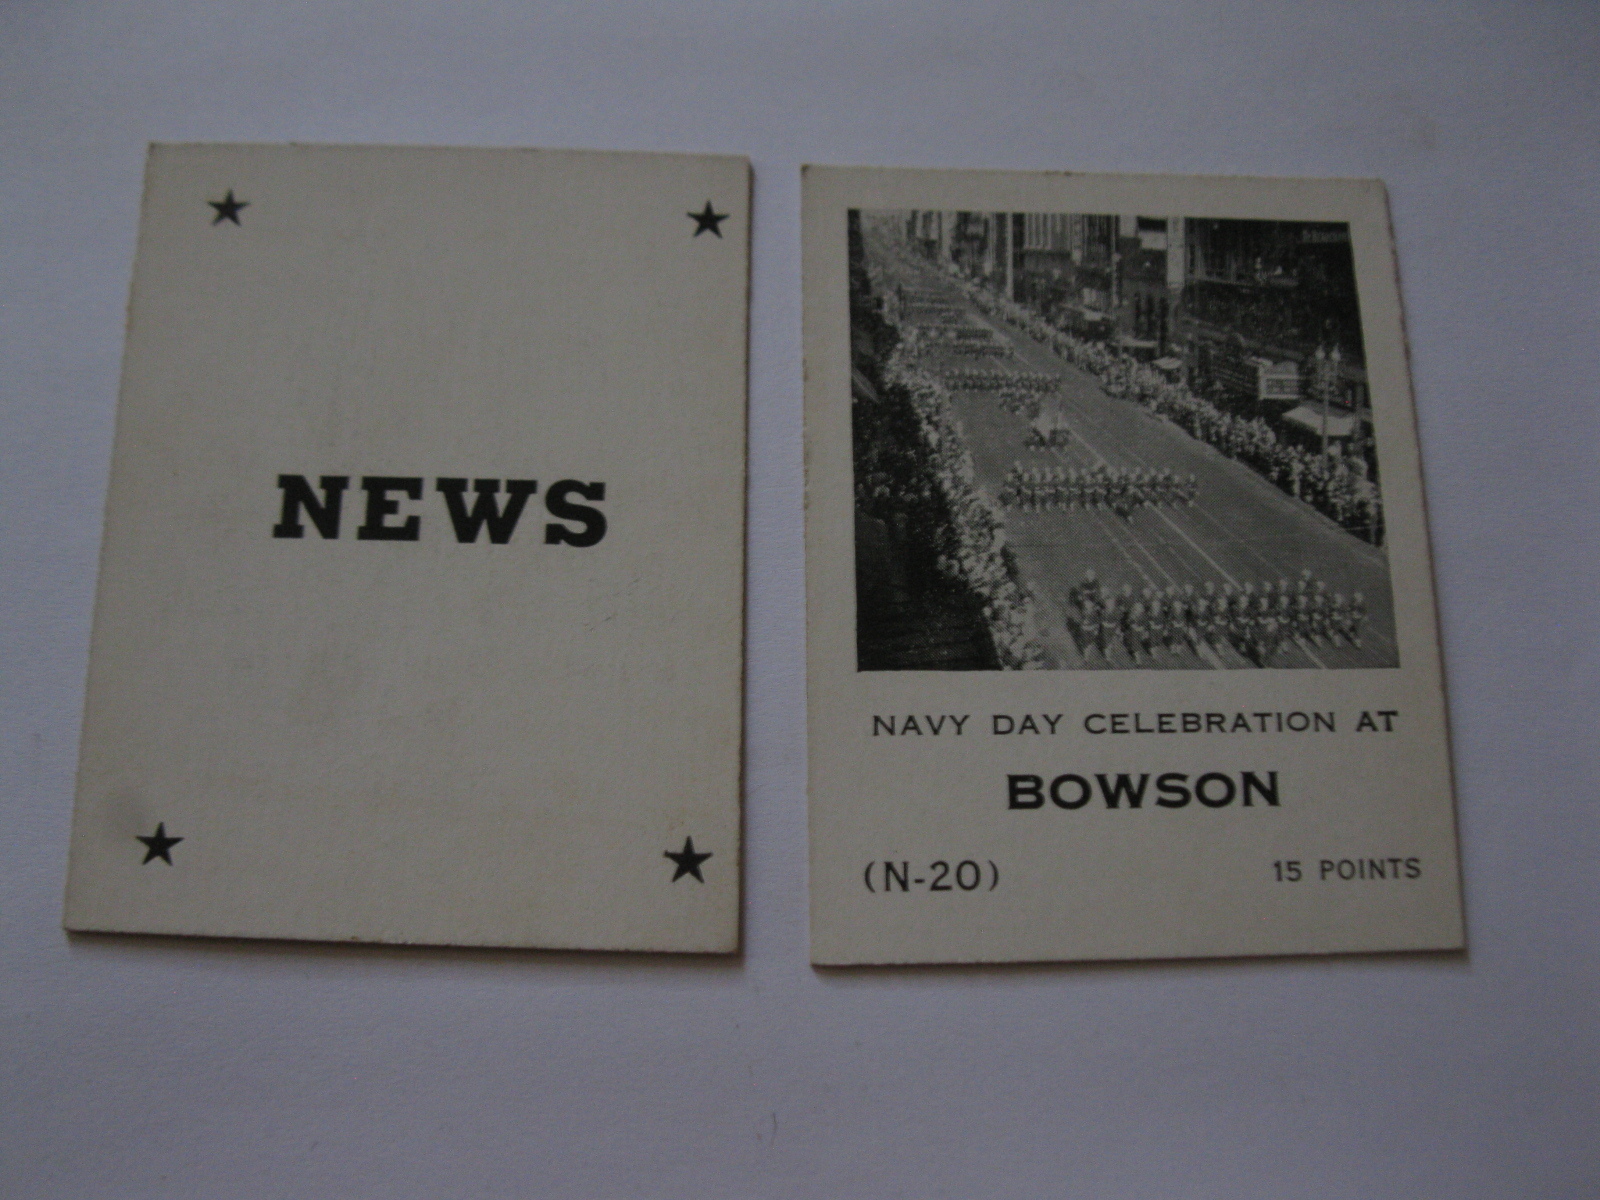 Primary image for 1958 Star Reporter Board Game Piece: News Card - Bowson